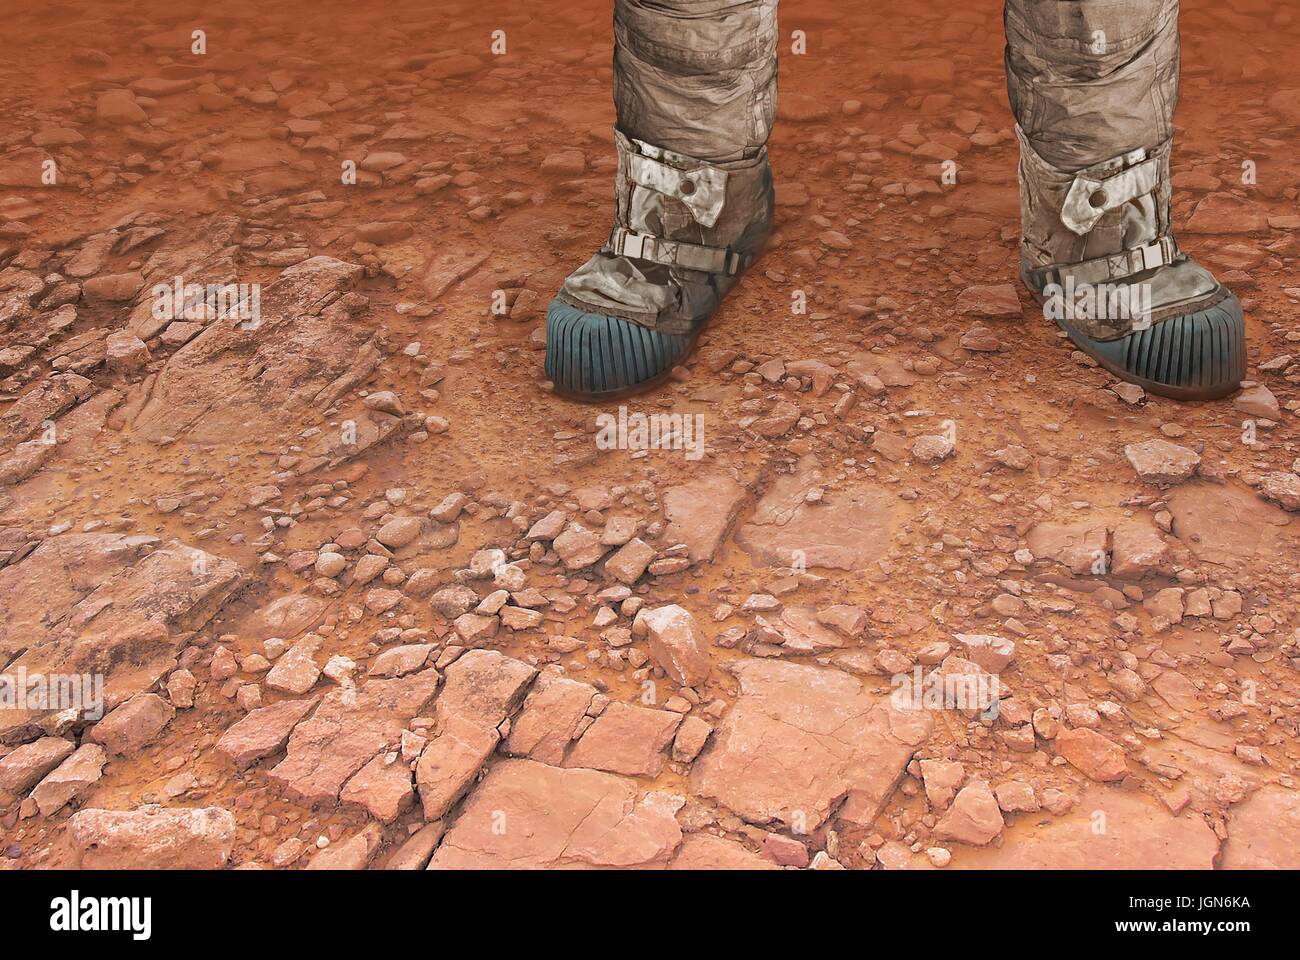 Humans on Mars, artwork. An illustration of a pair of legs on the surface of the red planet, perhaps belonging to future astronauts â€“ or tourists. A human expedition to Mars would be a costly, dangerous but rewarding venture. Stock Photo